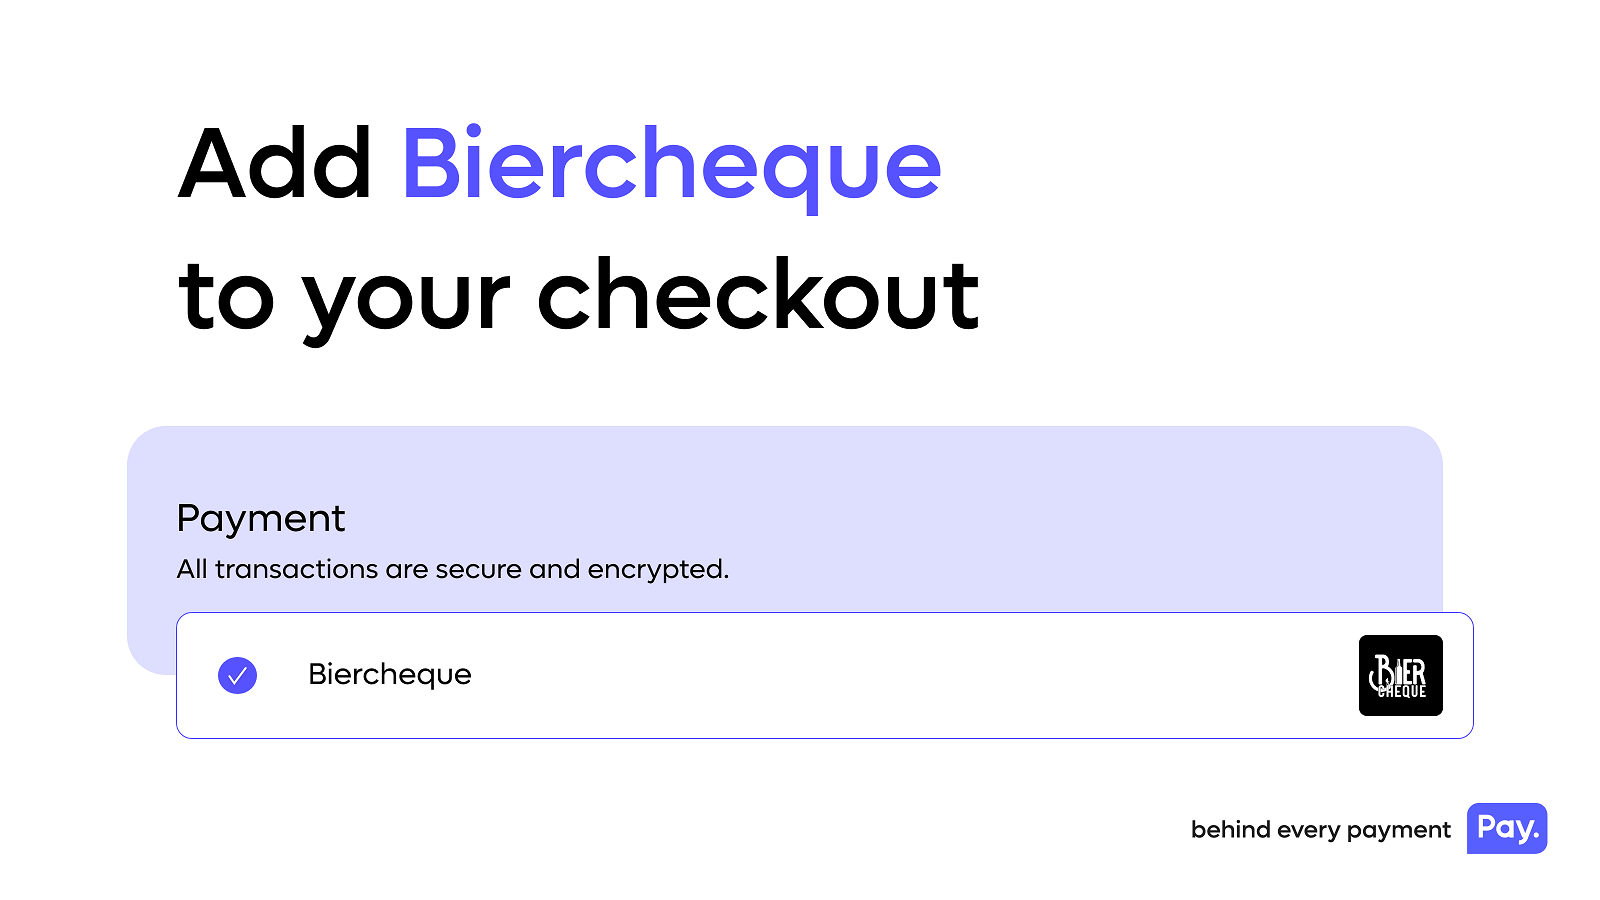 Add Biercheque to your checkout